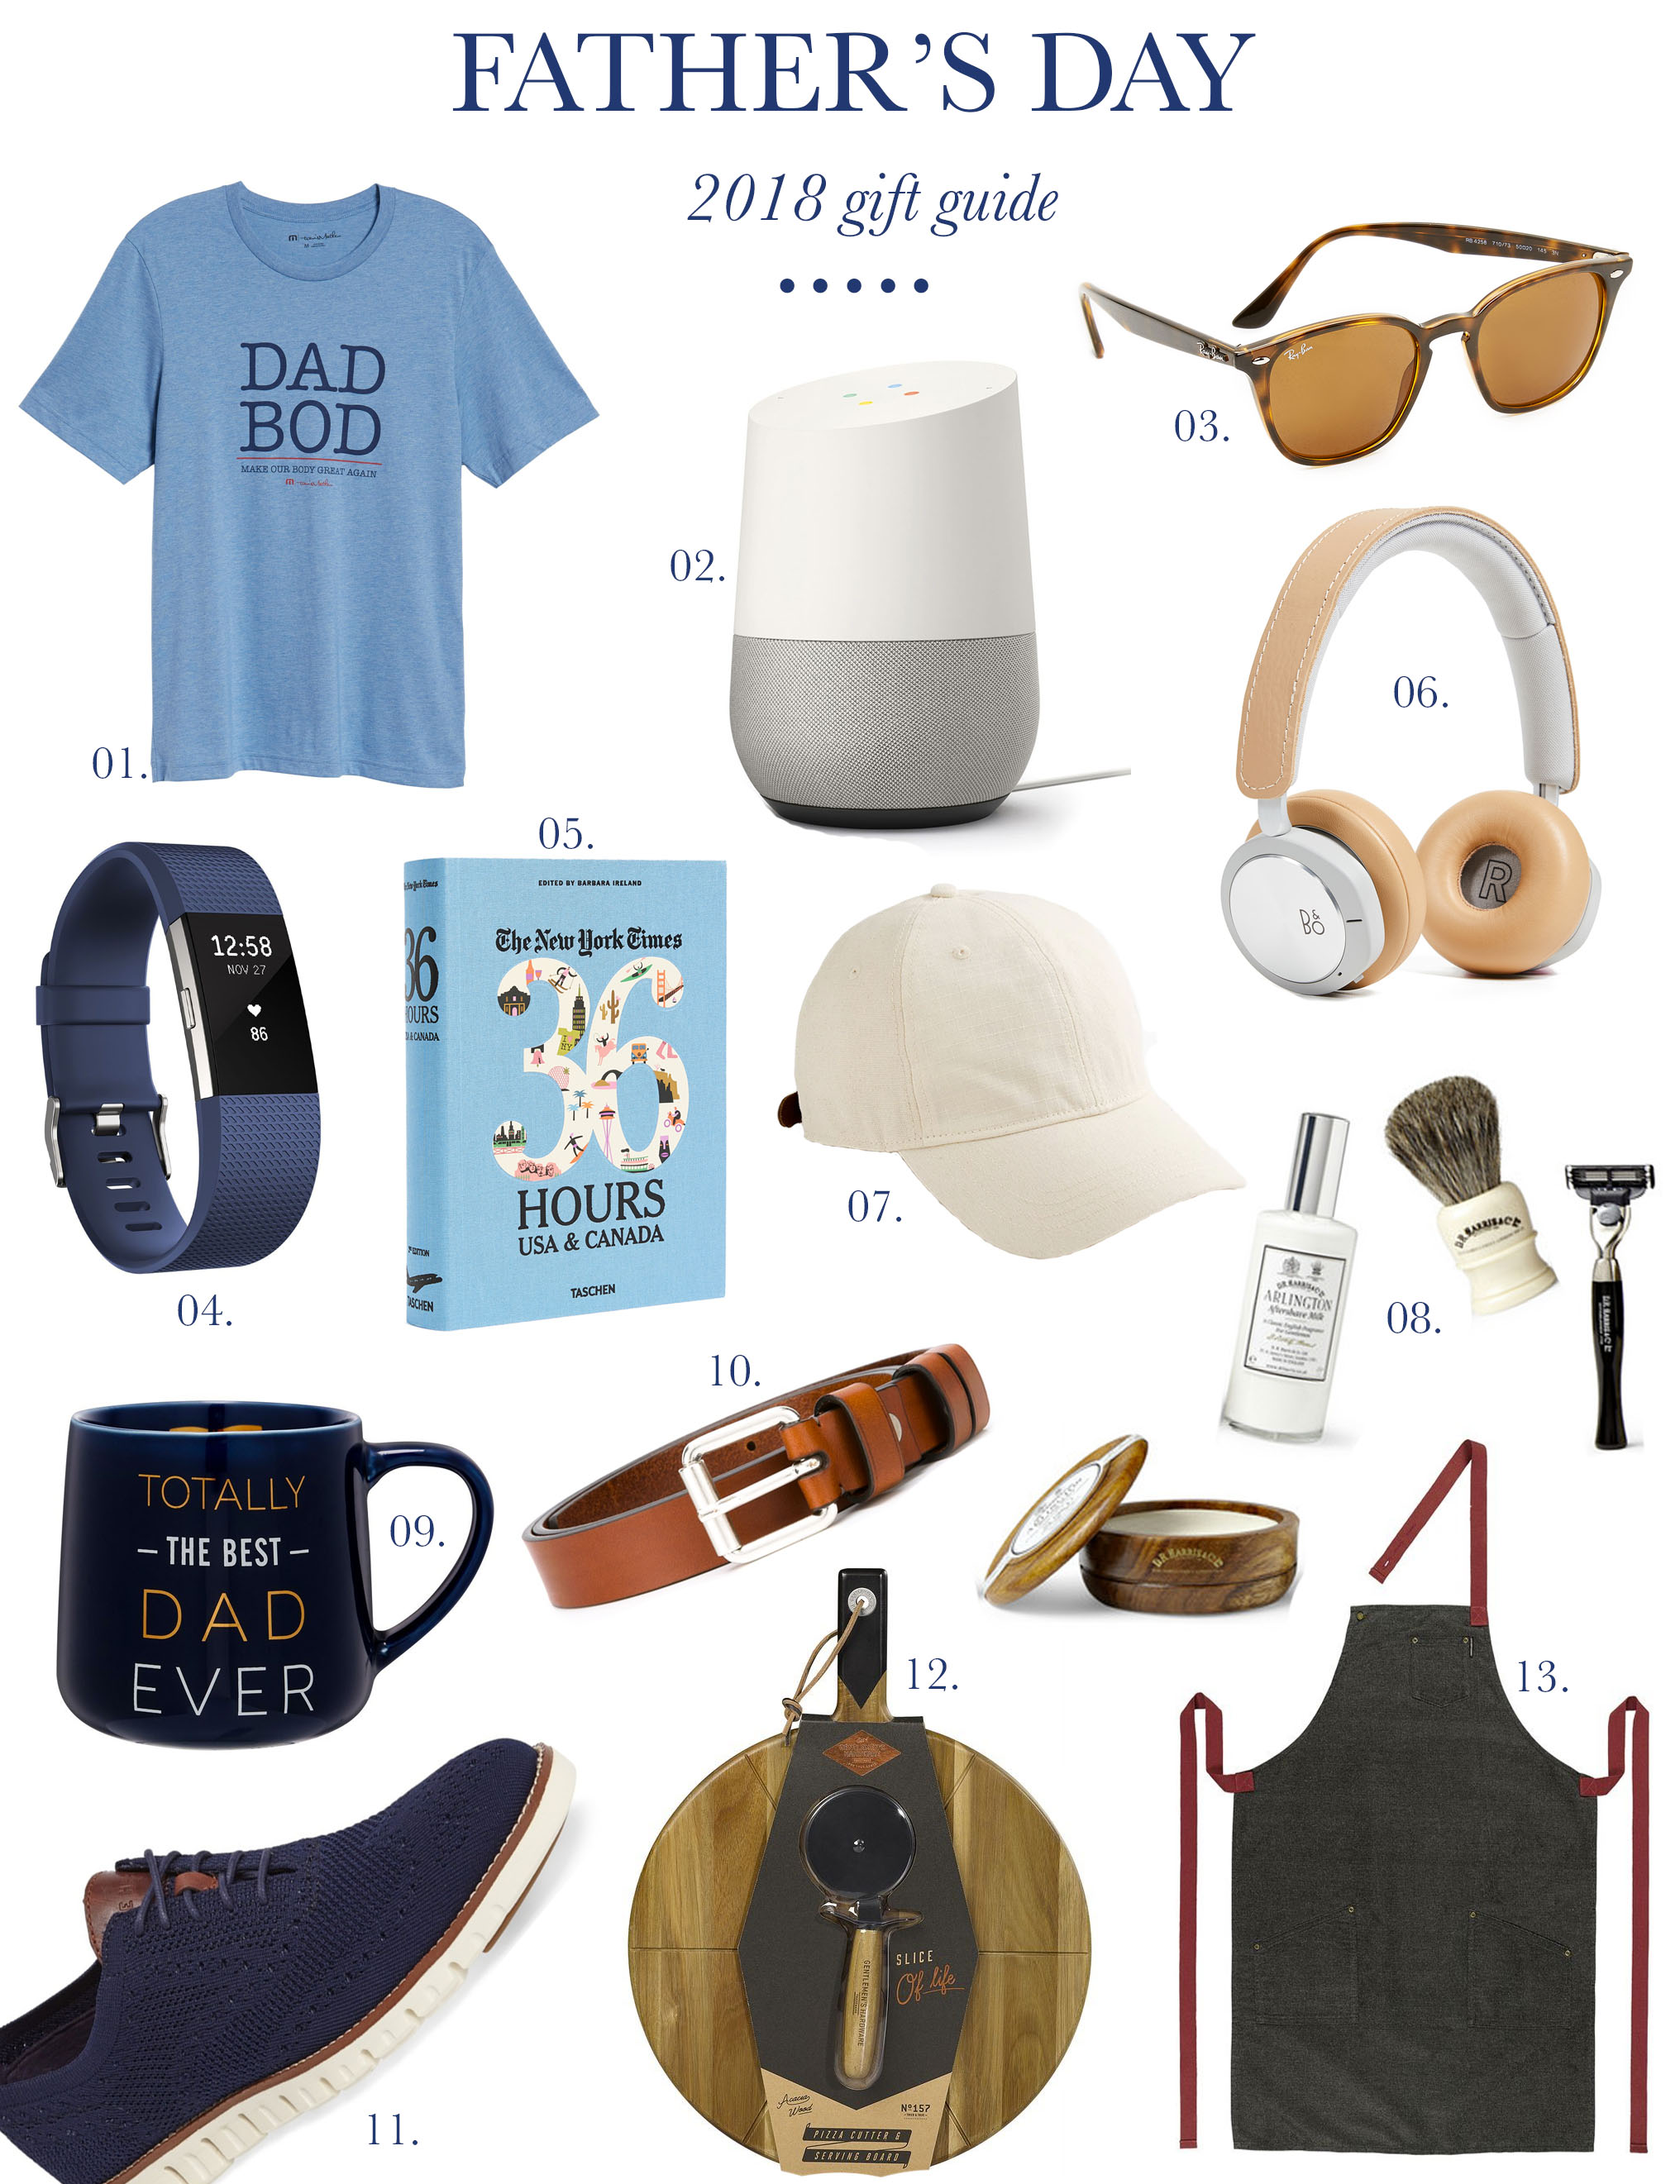 Father's Day Gift Guide 2018 | The 